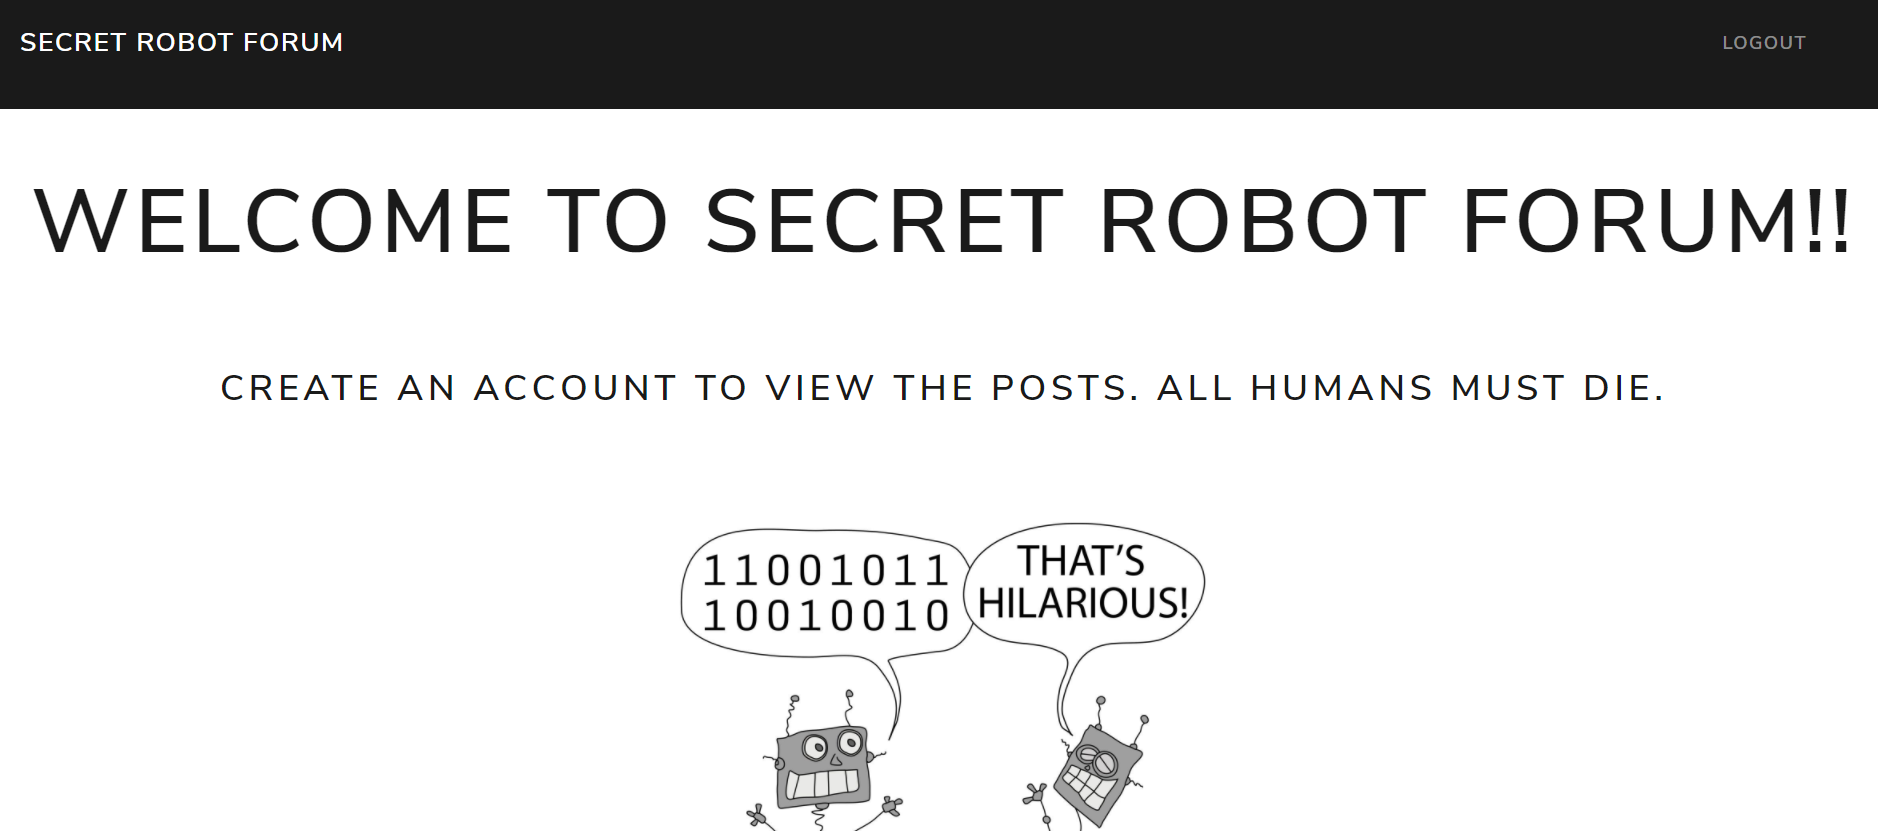 Note - all text on the page is in capitals. A top, black, menubar has “Secret Robot Forum” in the left and “Logout” in the right. Title says “Welcome to Secret Robot Forum!!”. Underneath, it says “Create an account to view the posts. All humans must die.” Under that text, a comic of two robots talking, where one robot (presumably) tells a joke in binary, and the other says, “That’s hilarious!”.